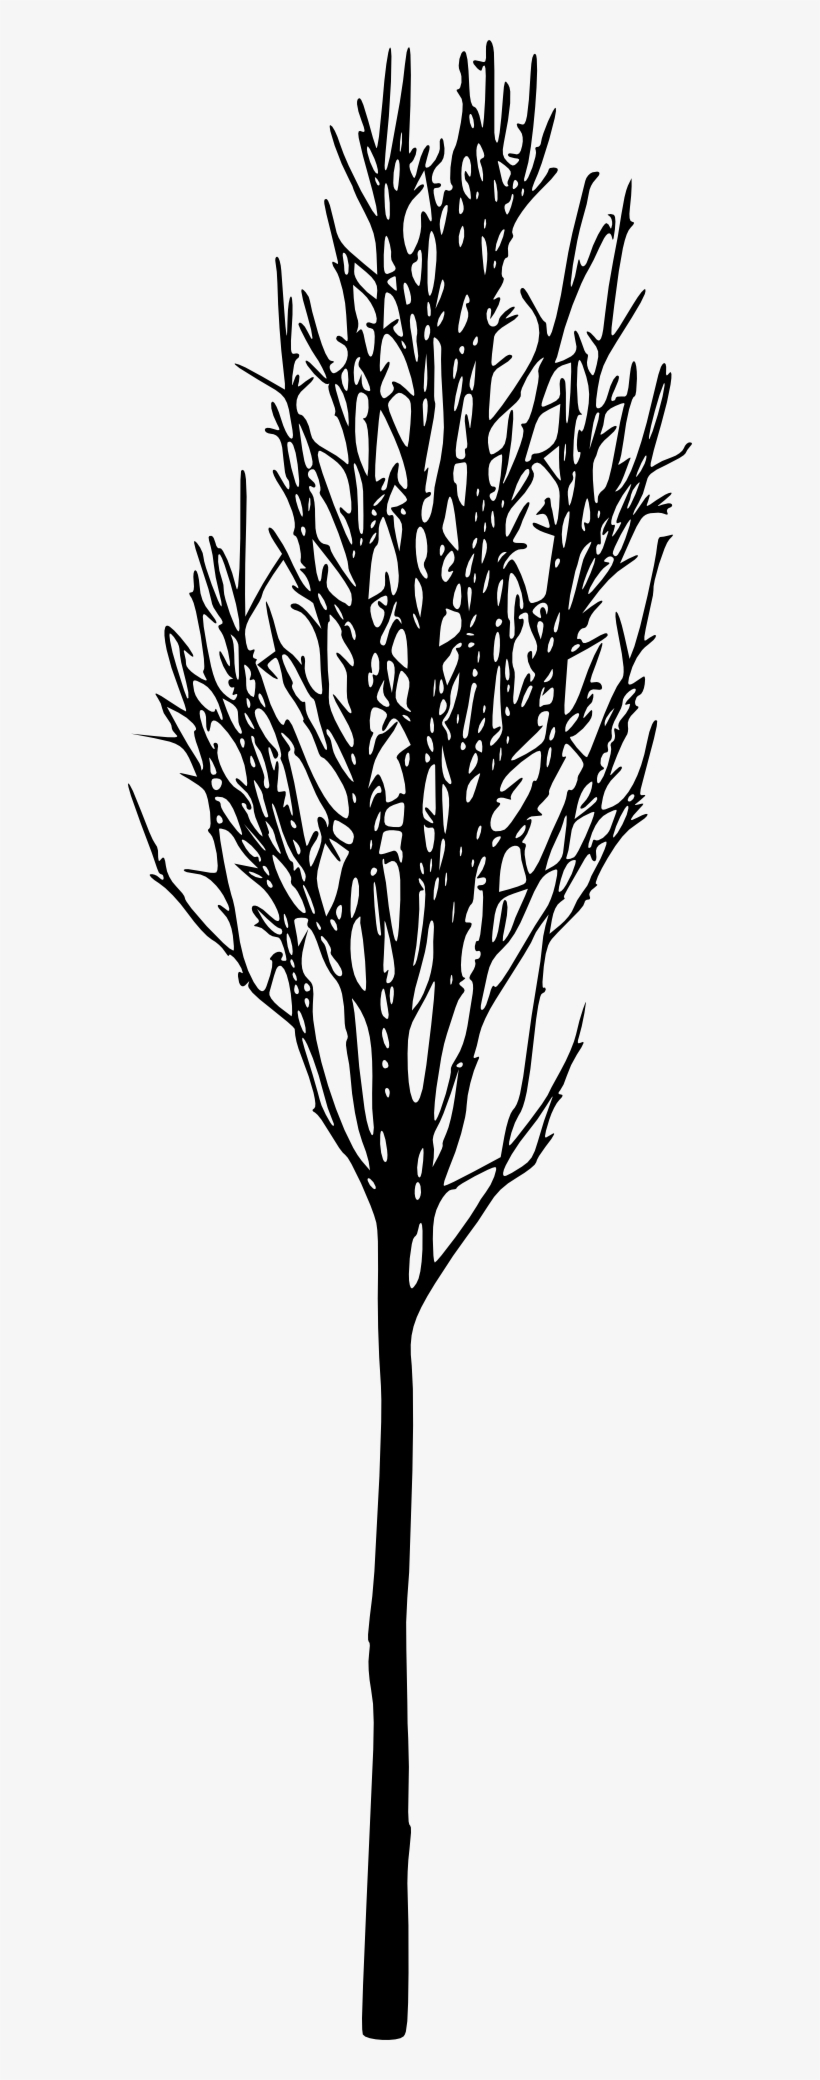 12 Simple Bare Tree Silhouettes - Portable Network Graphics, transparent png #785834